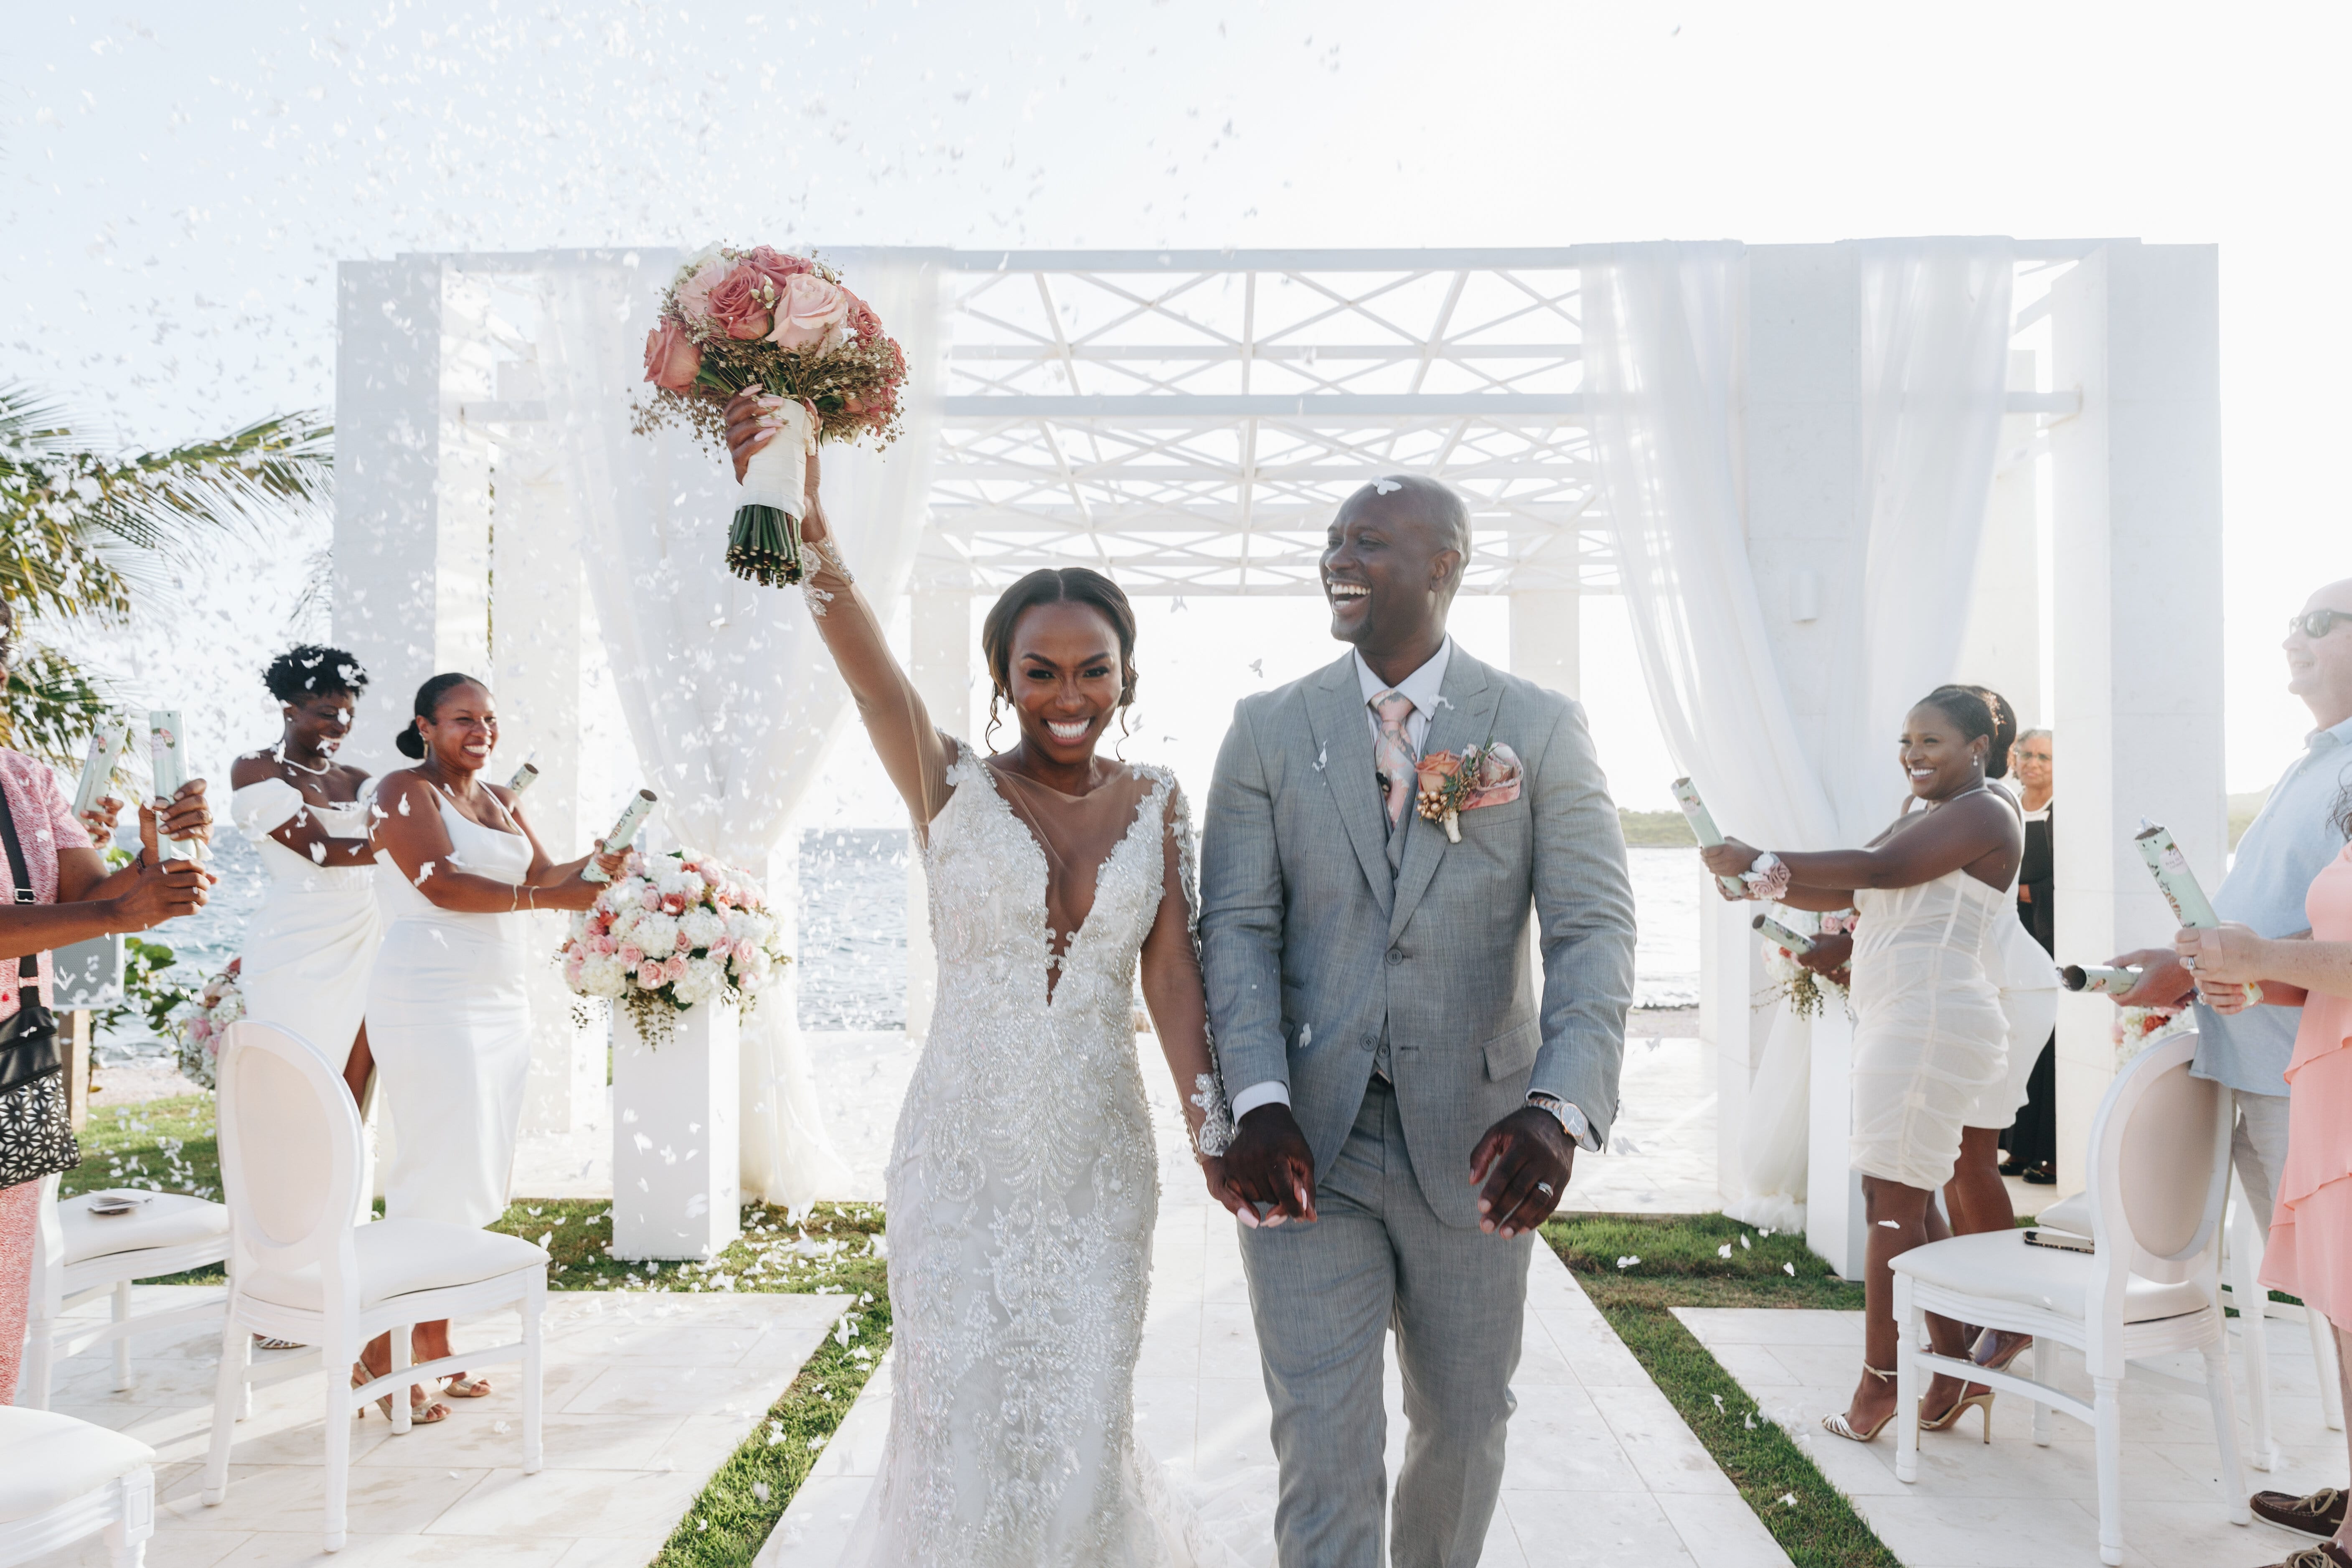 Getting Married In The Bahamas: Insights From Local Wedding Planners